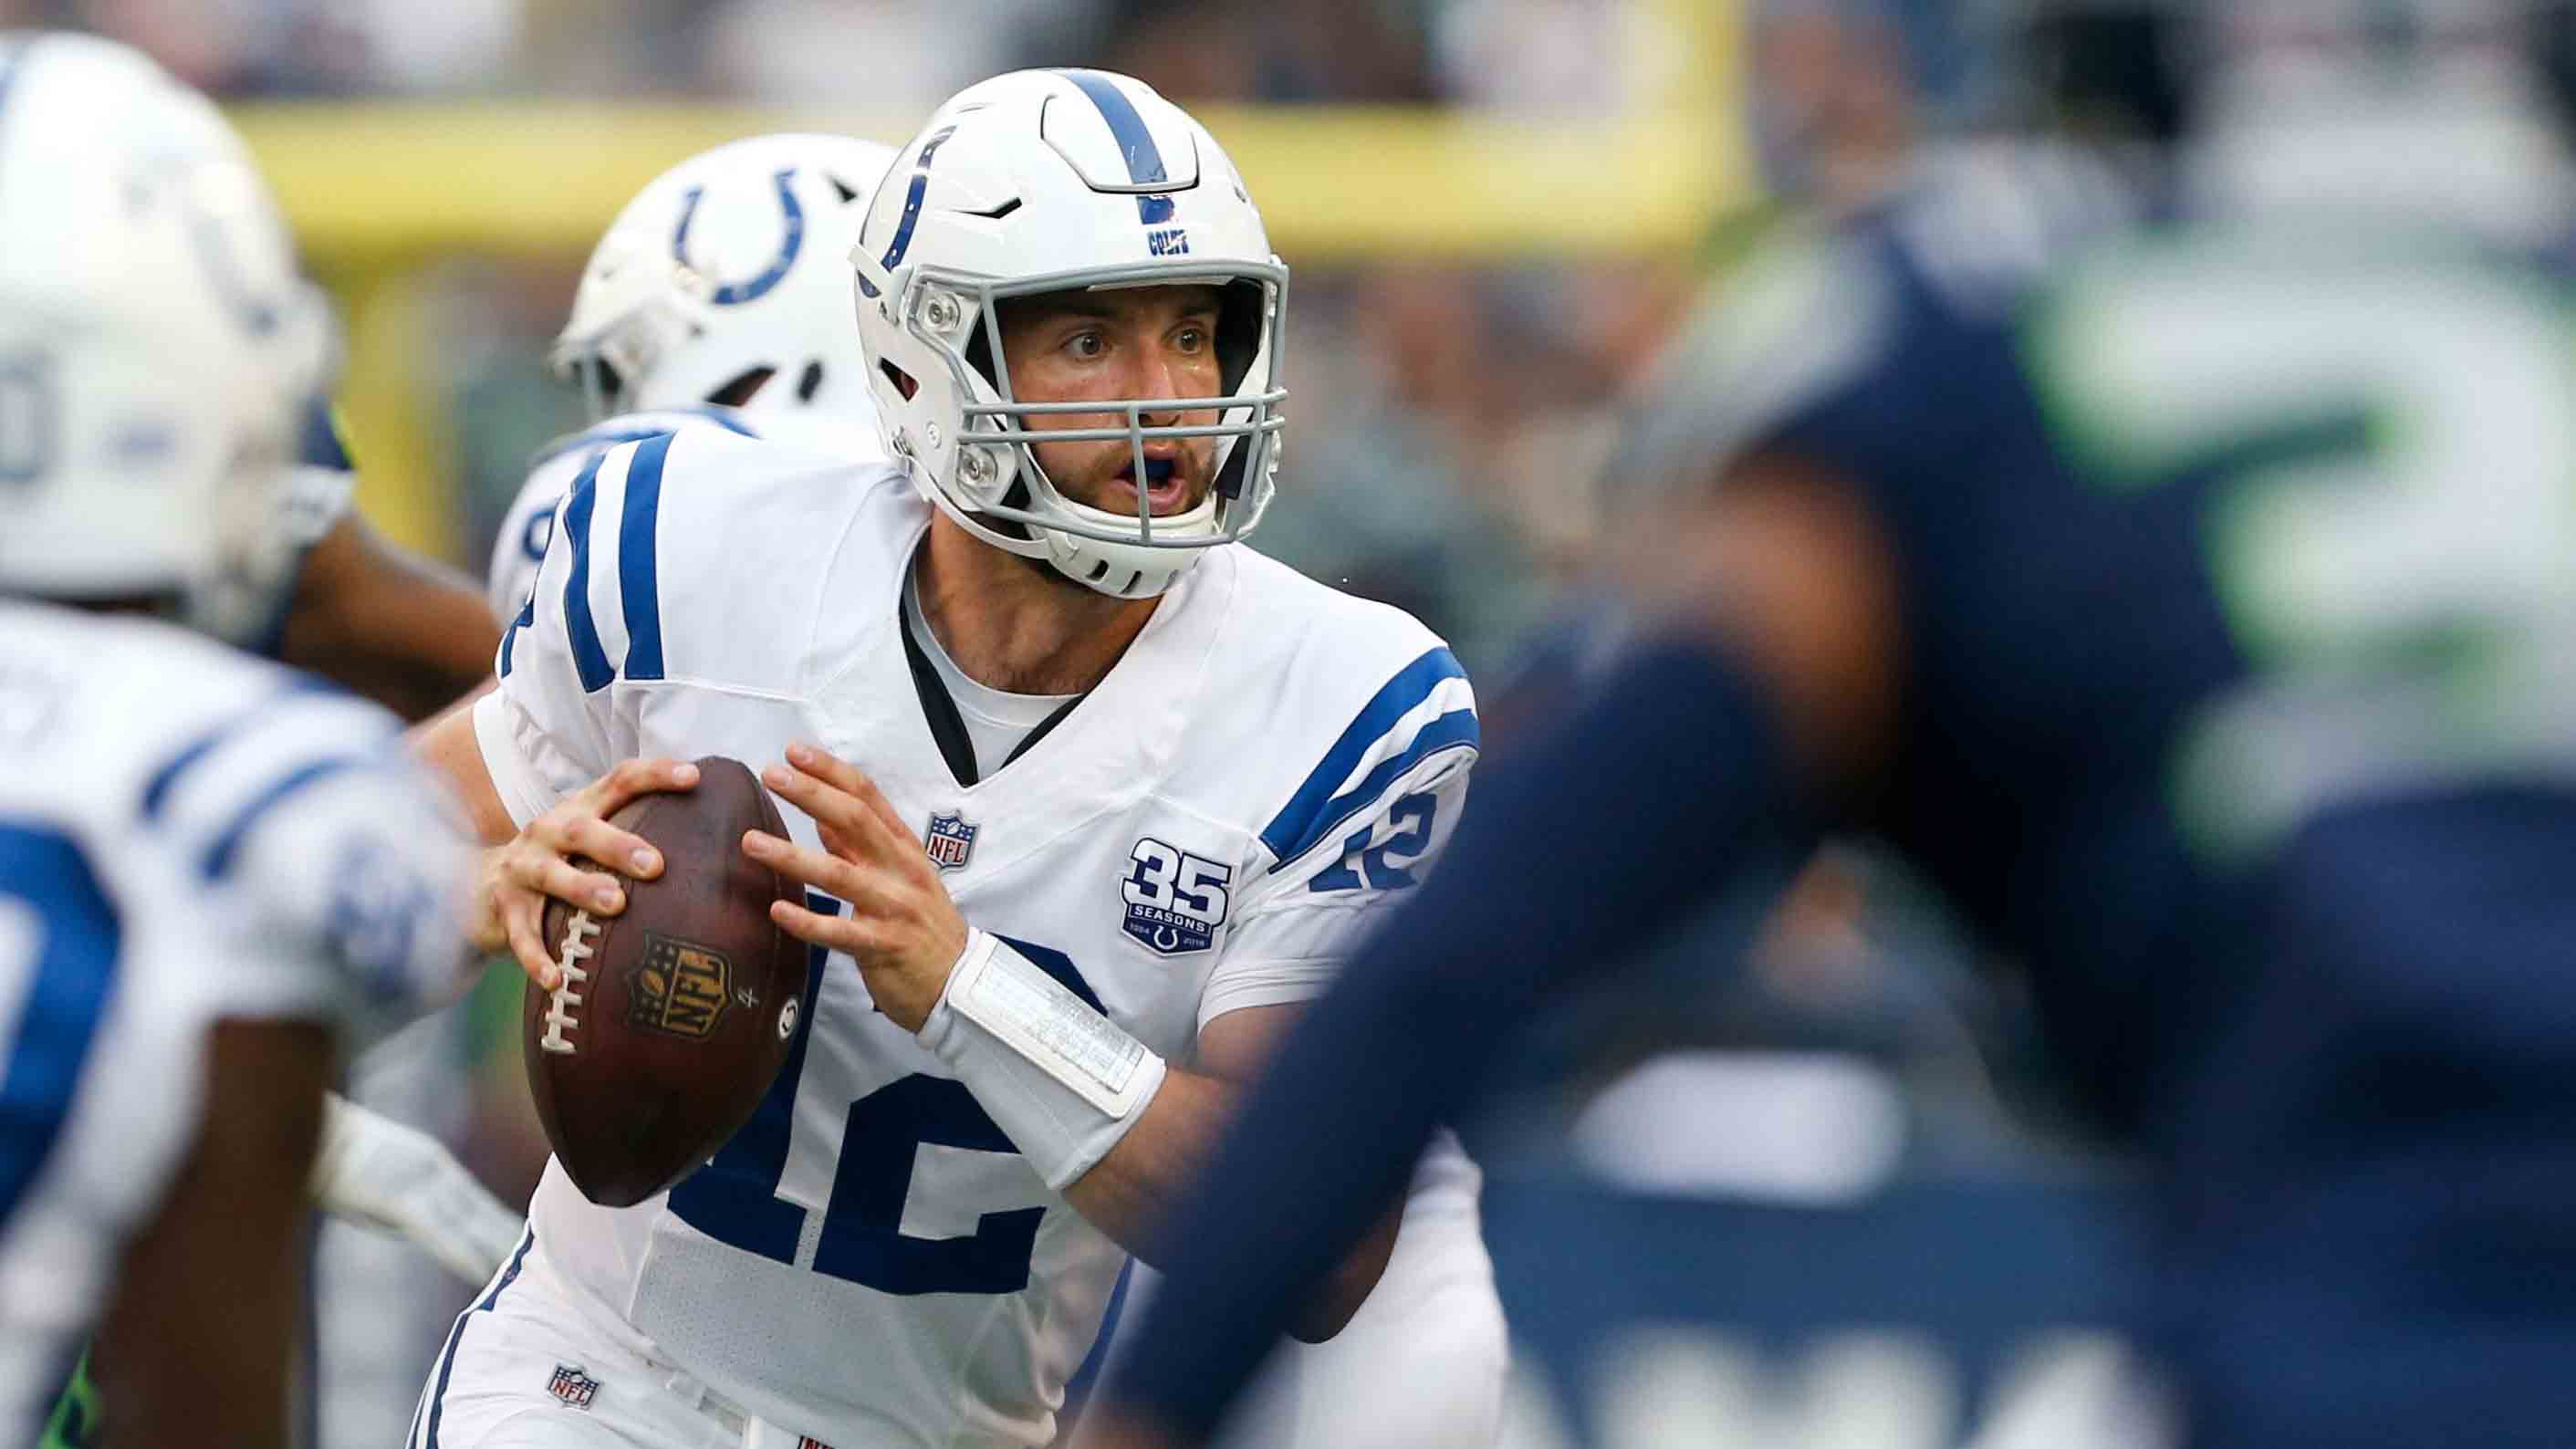 Luck returns to game action as Colts beat Seahawks 19-17